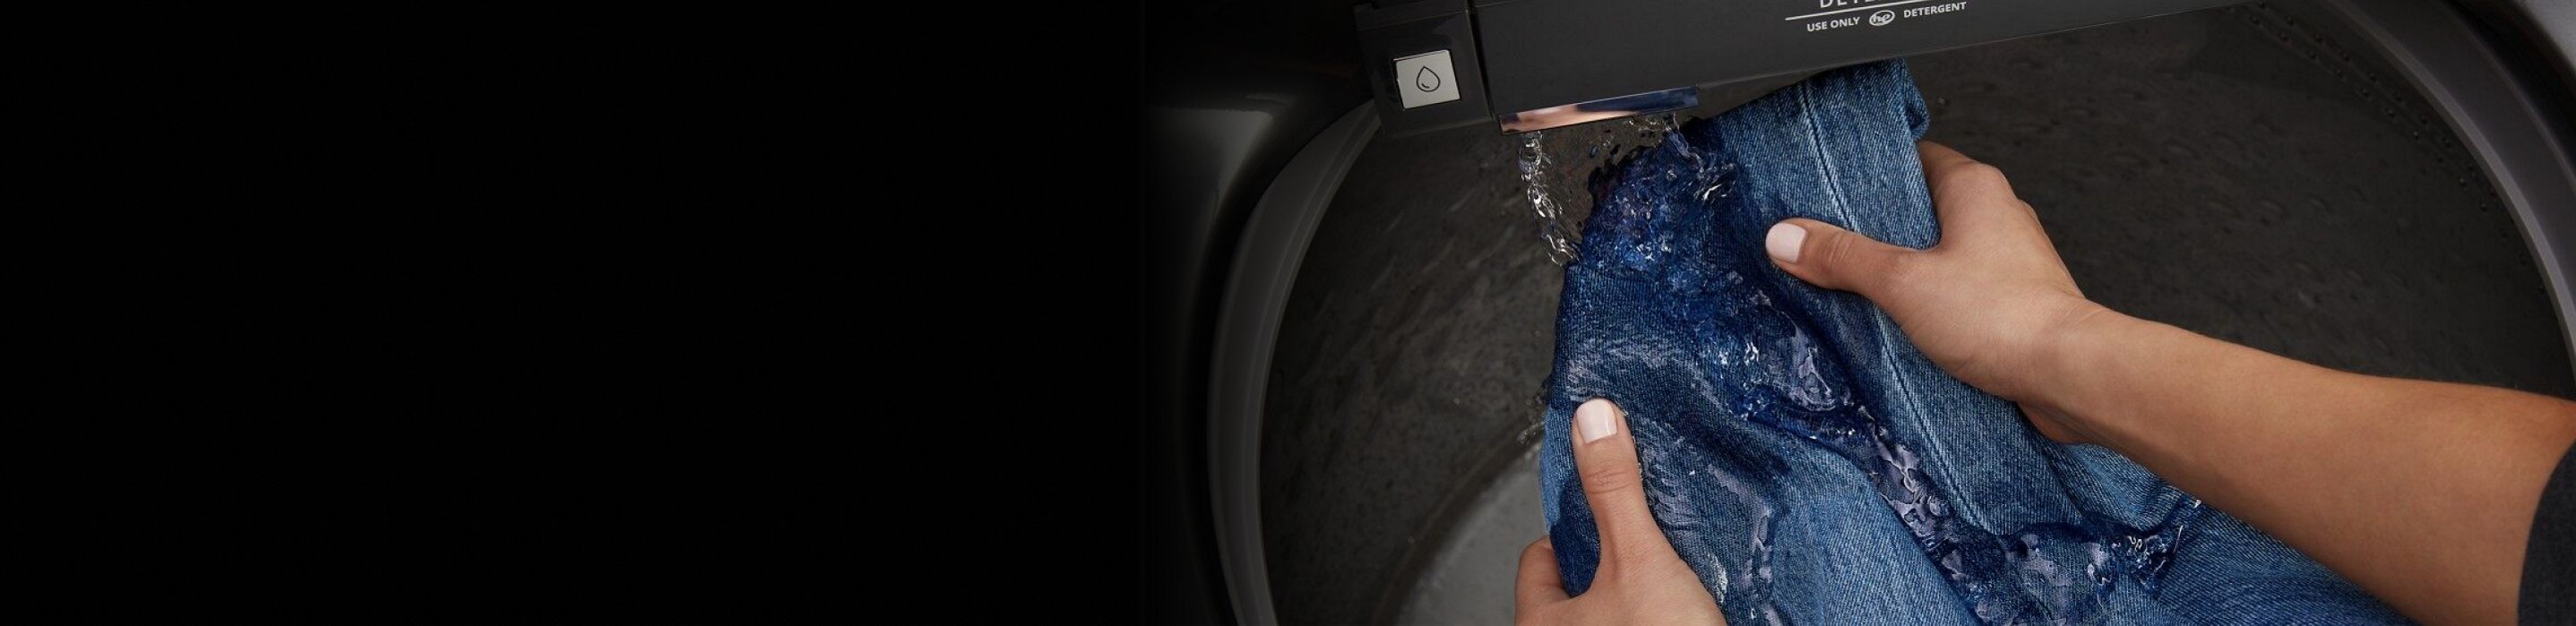 Jeans getting rinsed in the built-in water faucet.